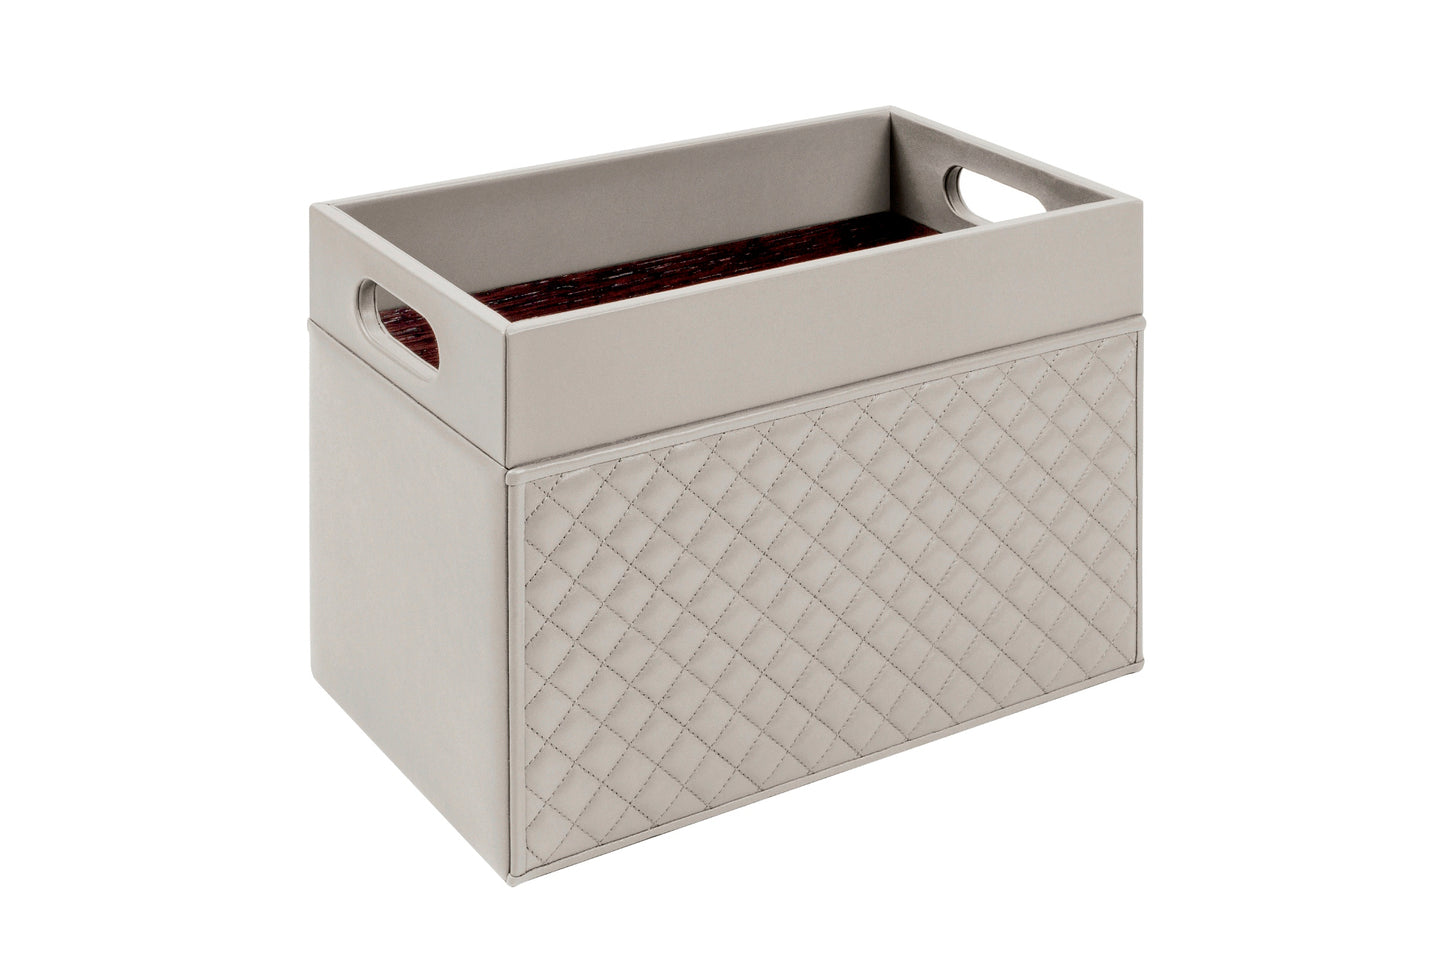 Emy Diamonds Magazine Holder by Riviere | Leather magazine holder with quilted diamonds leather on two sides and lining in varnished wood. It features a central divider. | Home Decor and Organization | 2Jour Concierge, your luxury lifestyle shop